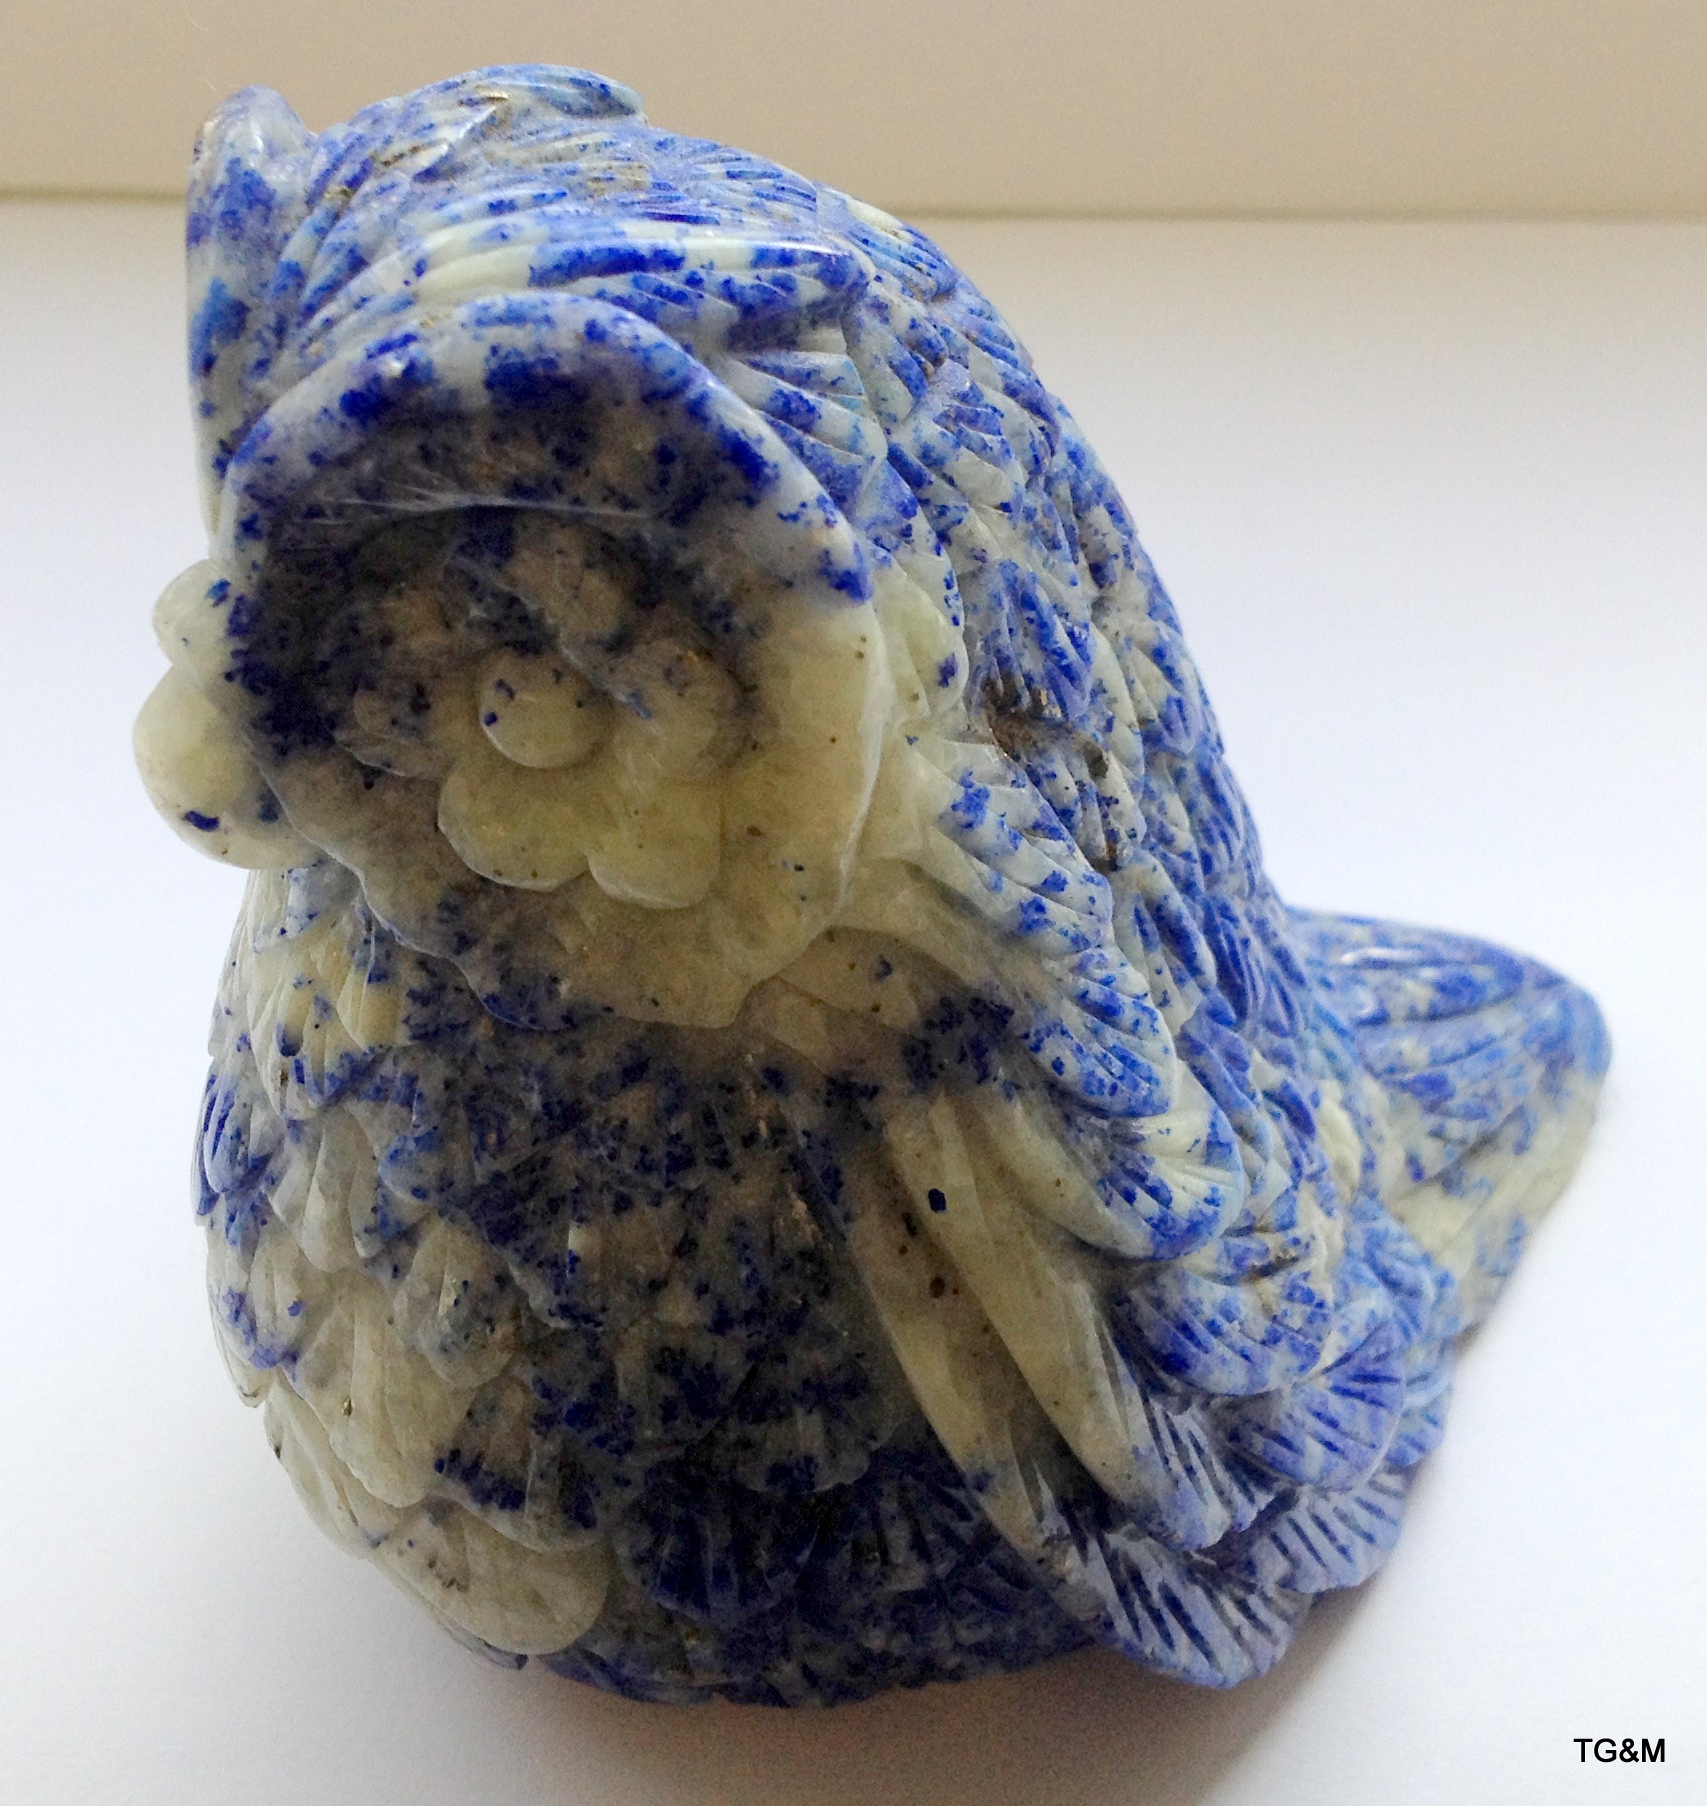 Carved figure of an owl in lapiz lazuli